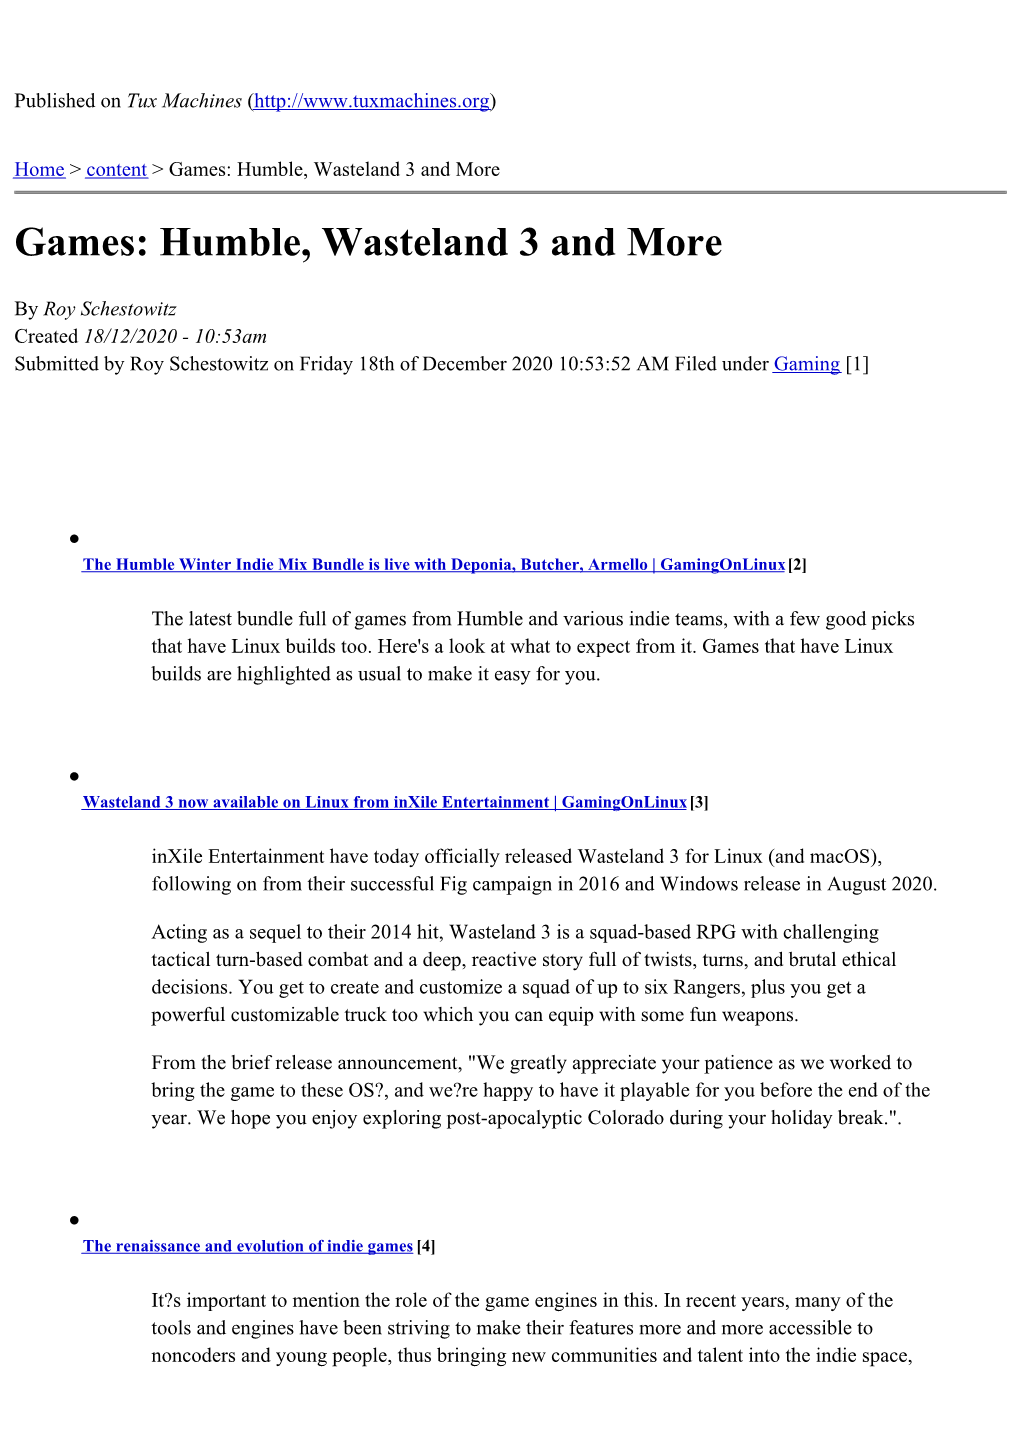 Games: Humble, Wasteland 3 and More